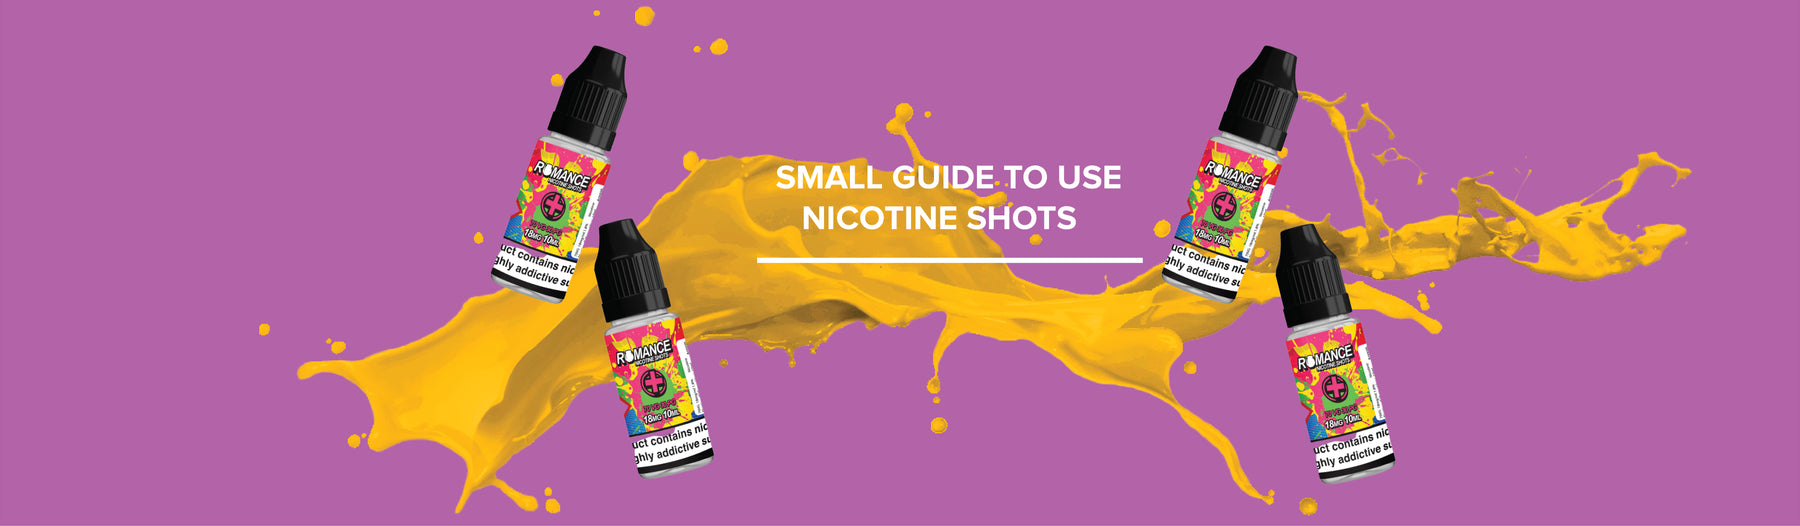 Small guide to use Nicotine shots